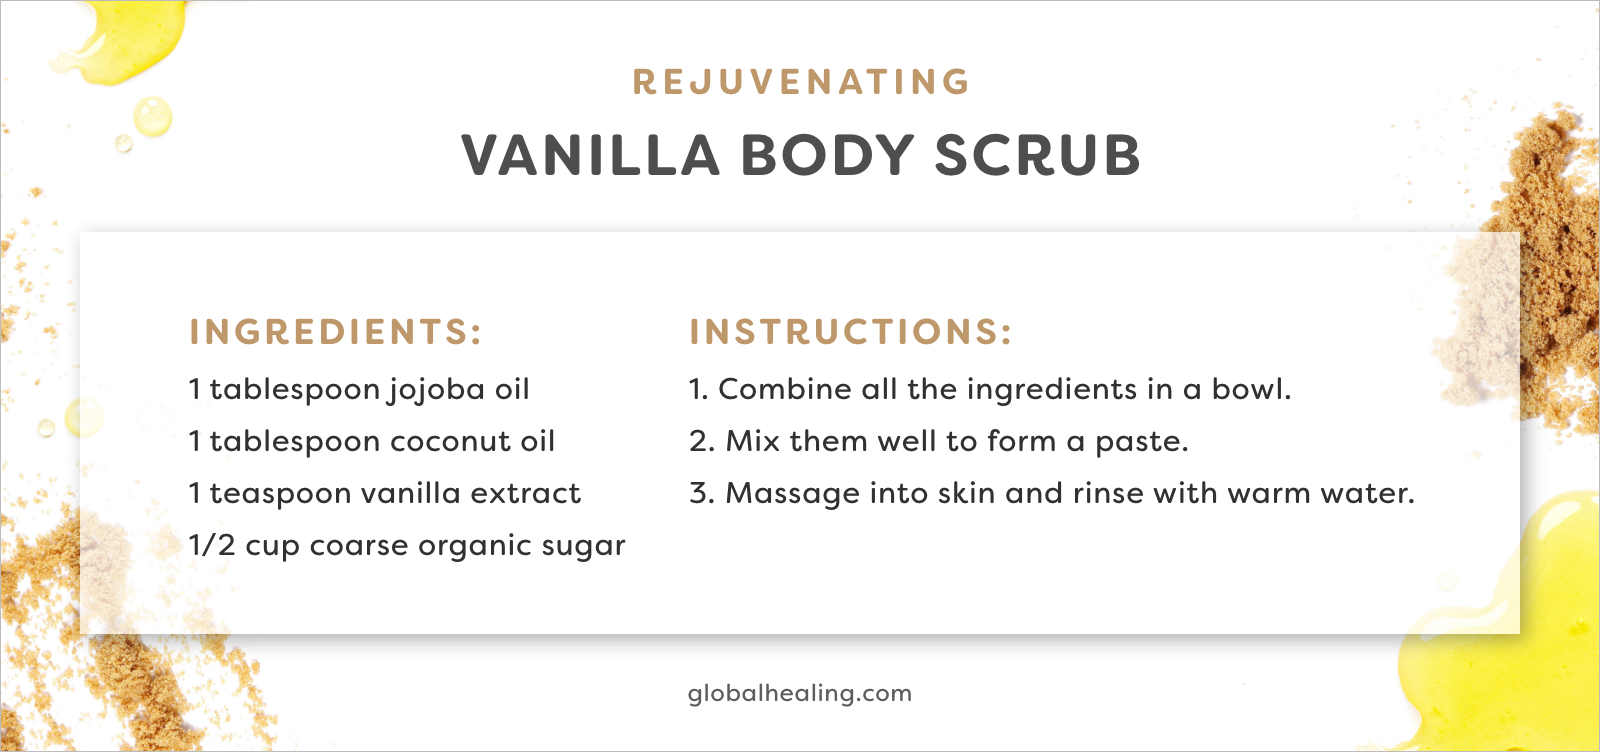 Try this rejuvenating vanilla body scrub that'll leave your skin feeling soft and moisturized.